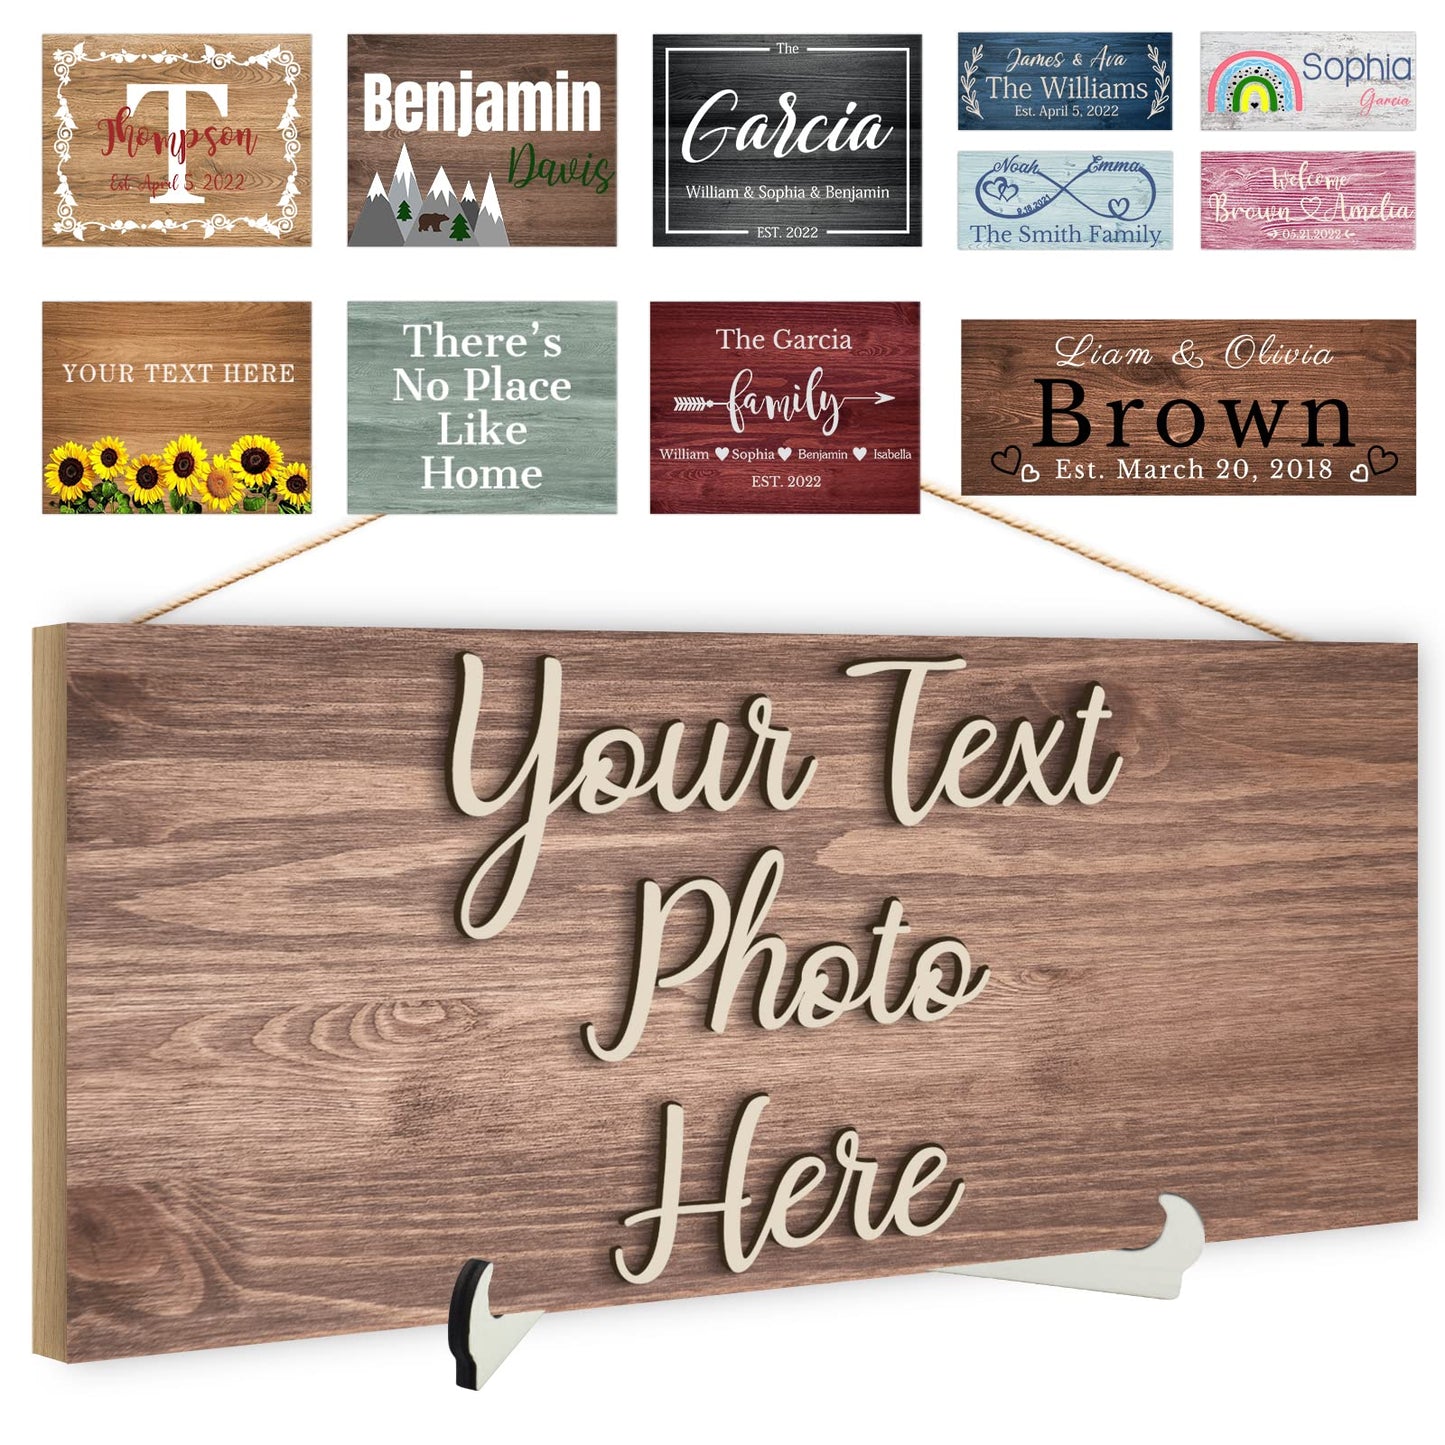 Custom Wood Sign Prsonalized Text Business 3D Home Decor, Personalized Rustic Plaque Board Hanging Wooden Name Sign for Wall Art, Customized Signs